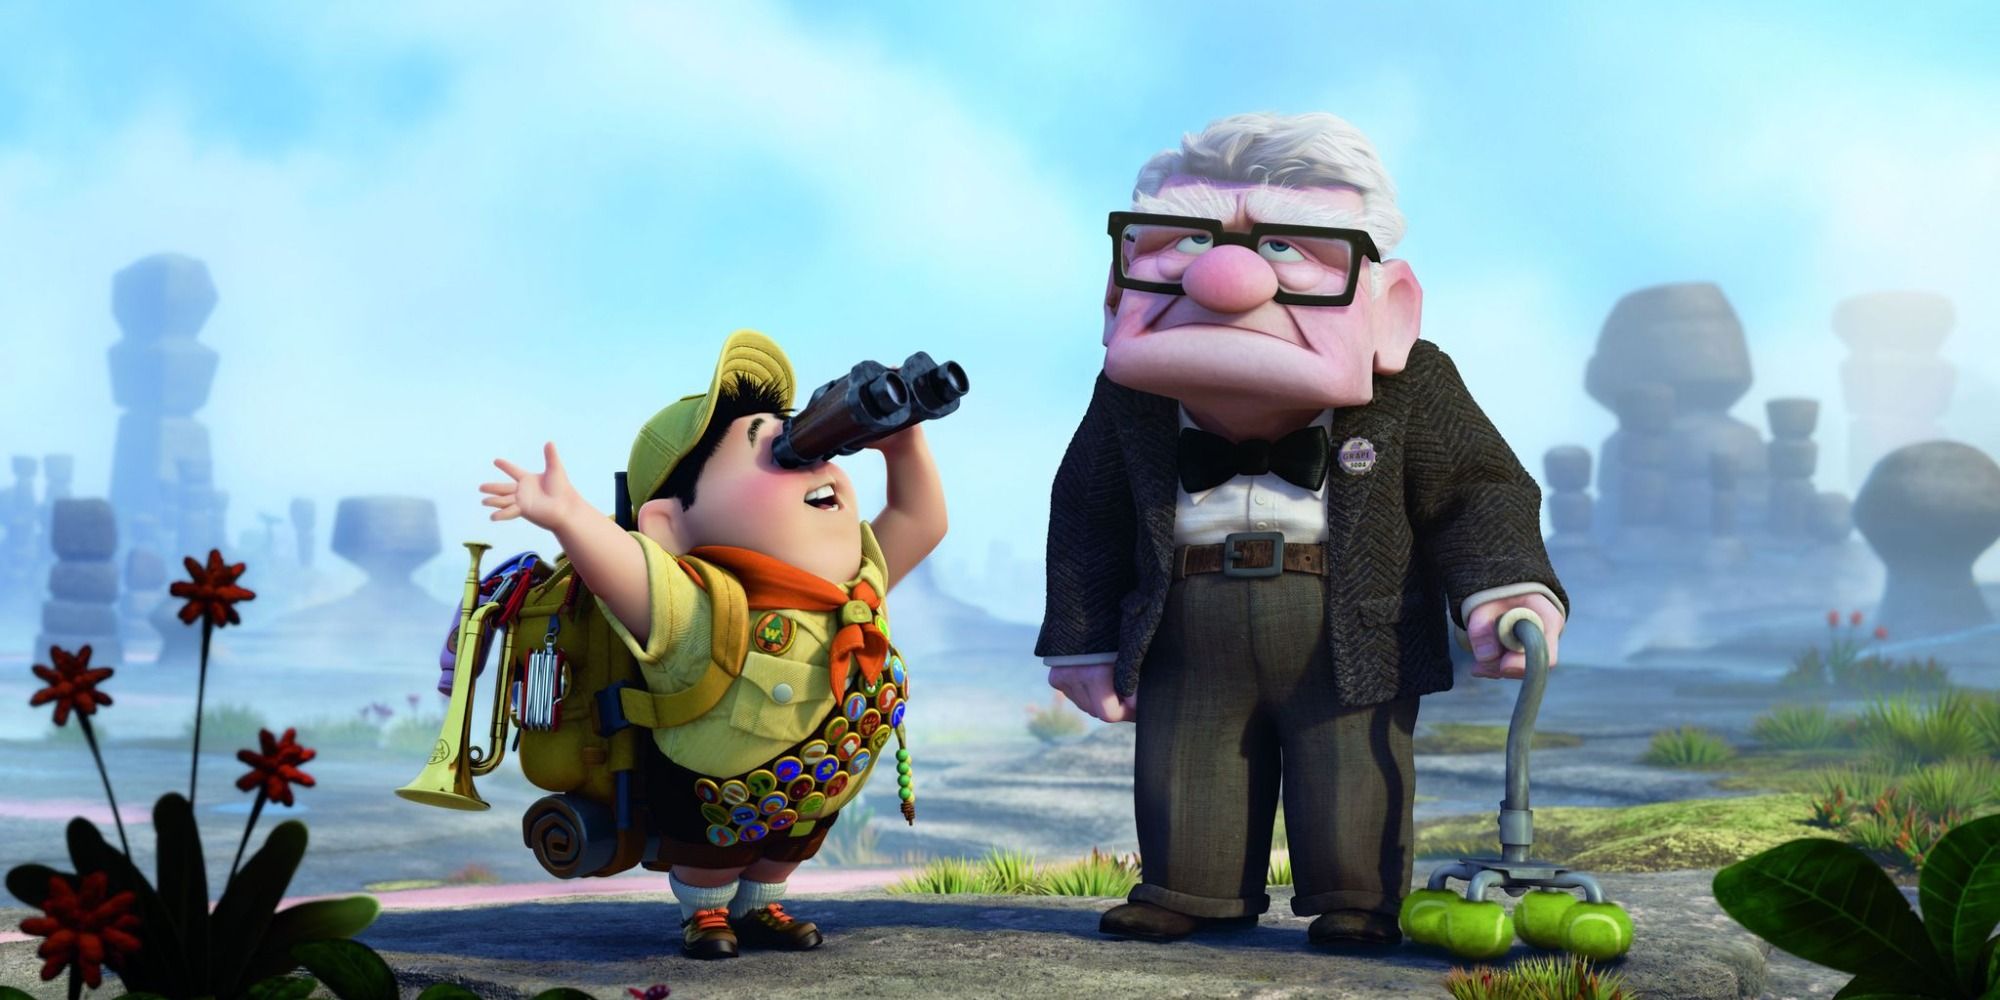 Russell is holding binoculars while Carl is rolling his eyes in Up